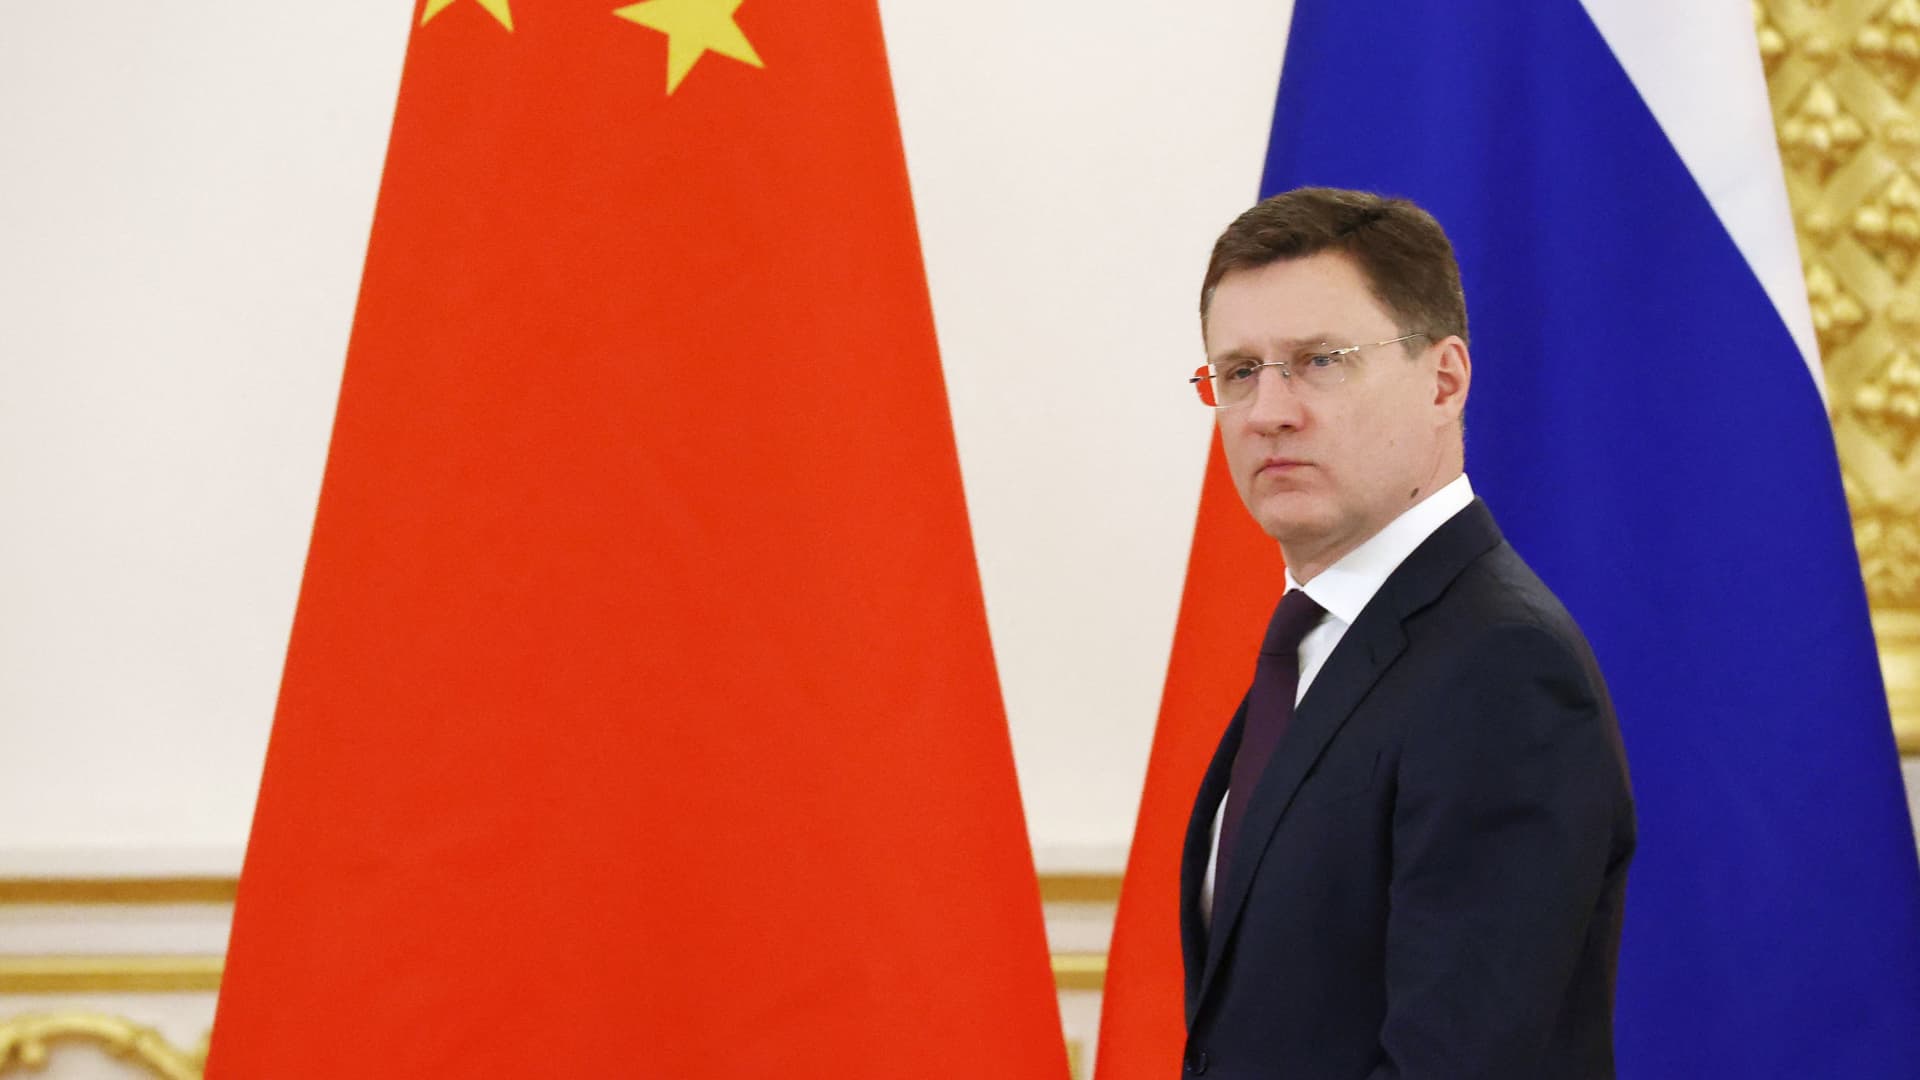 Russian Deputy Prime Minister Alexander Novak arrives for Russia - China talks in an expanded format at the Kremlin in Moscow, Russia March 21, 2023.